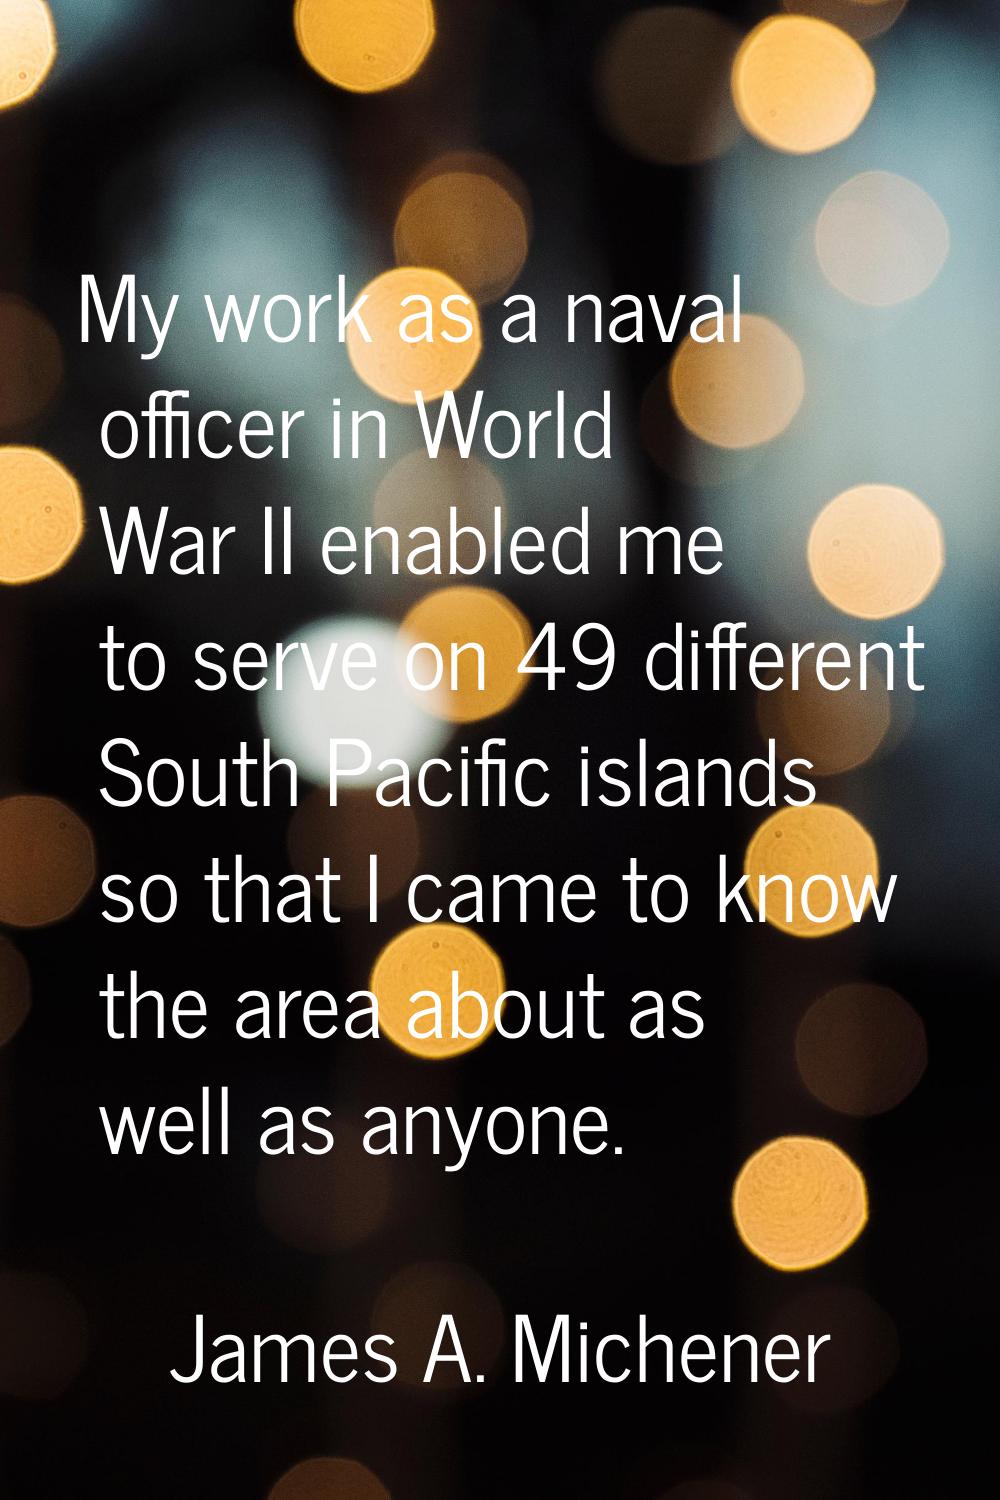 My work as a naval officer in World War II enabled me to serve on 49 different South Pacific island